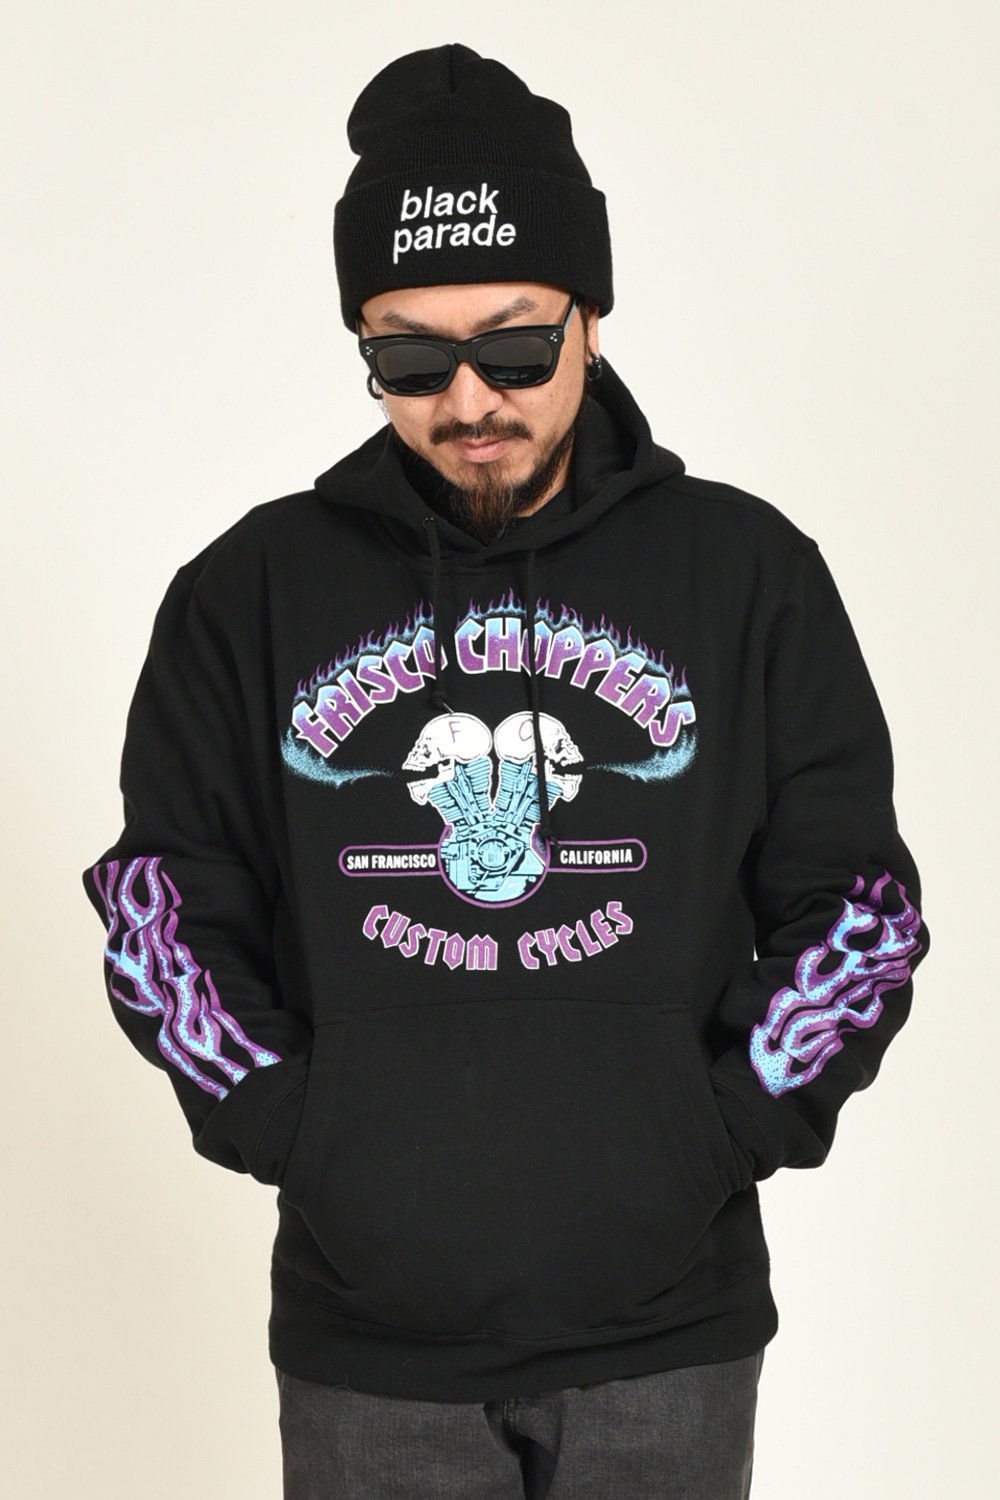 FRISCO CHOPPERS スウェットパーカー FRISCO CHOPPERS HOODIE 通販正規 